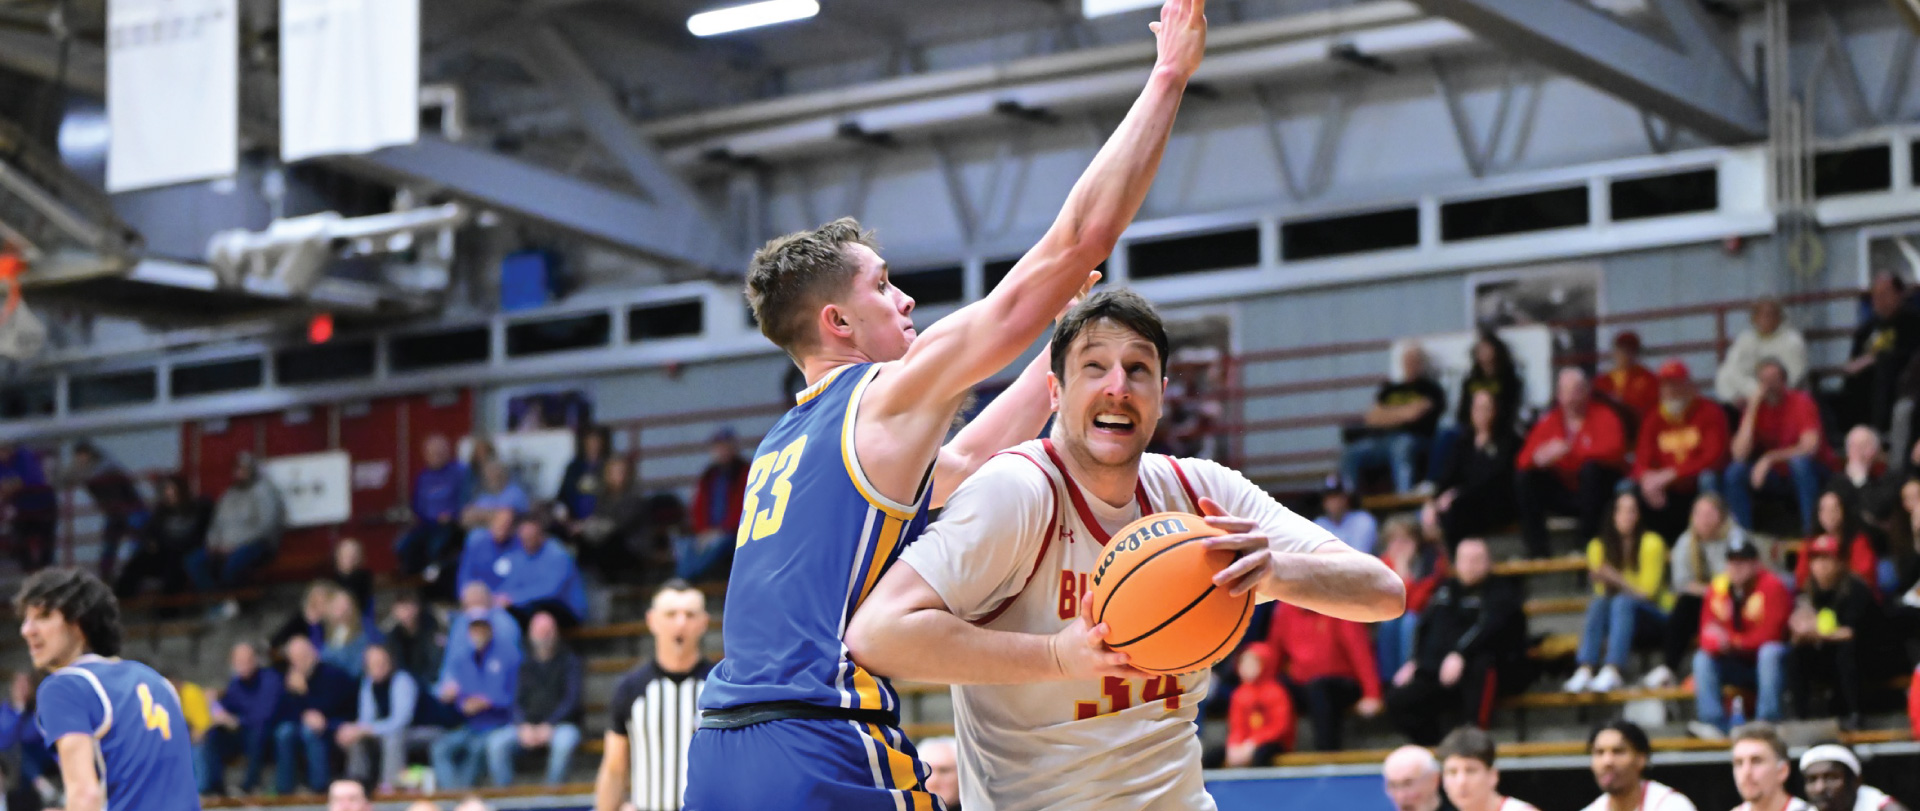 Ferris Men's Basketball's Vejas Grazulis driving to the net during their Sweet Sixteen game against LSSU